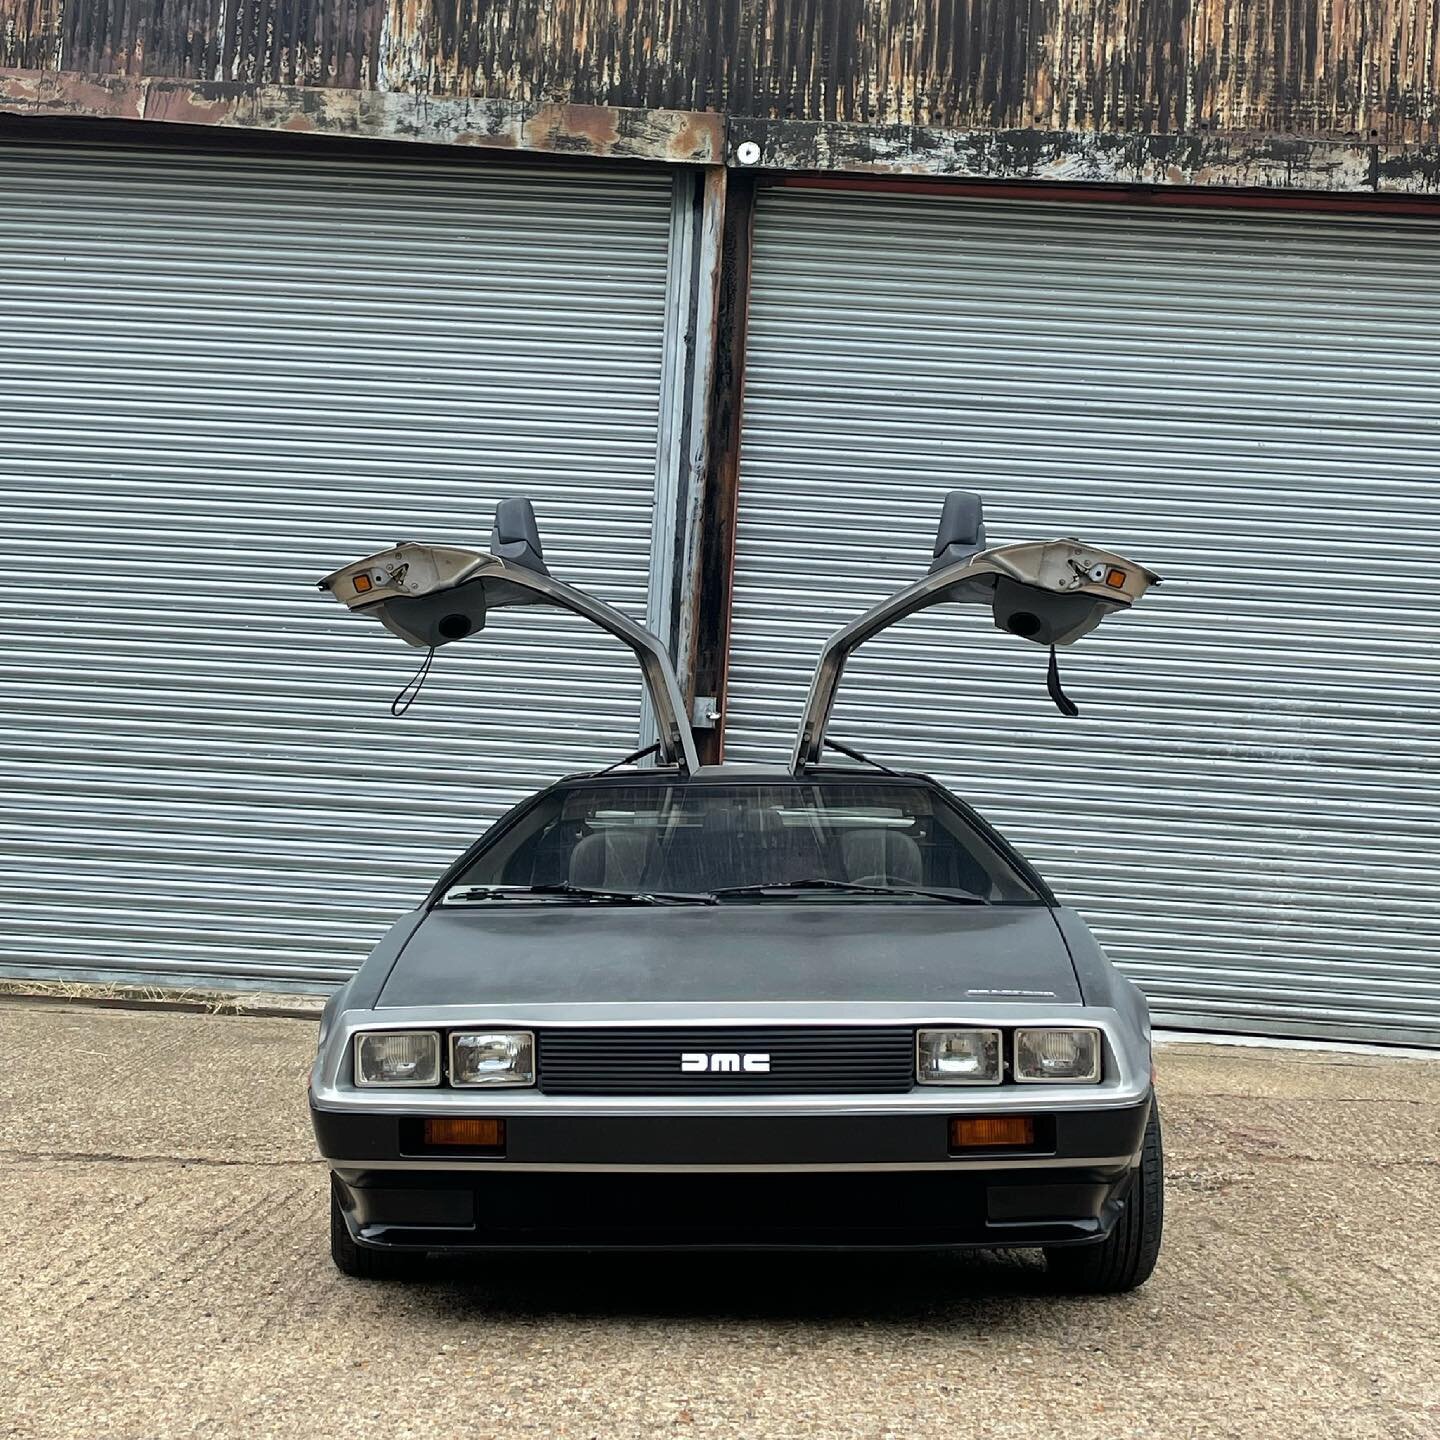 into storage at HVS today&hellip;..Now under a soft cover and CTEK battery charging. Secure, indoor car storage. #hvsuk #carstorageuk #htowndubandclassicclub #delorean #dmc #backtothefuture #fluxcapacitor #outtatime